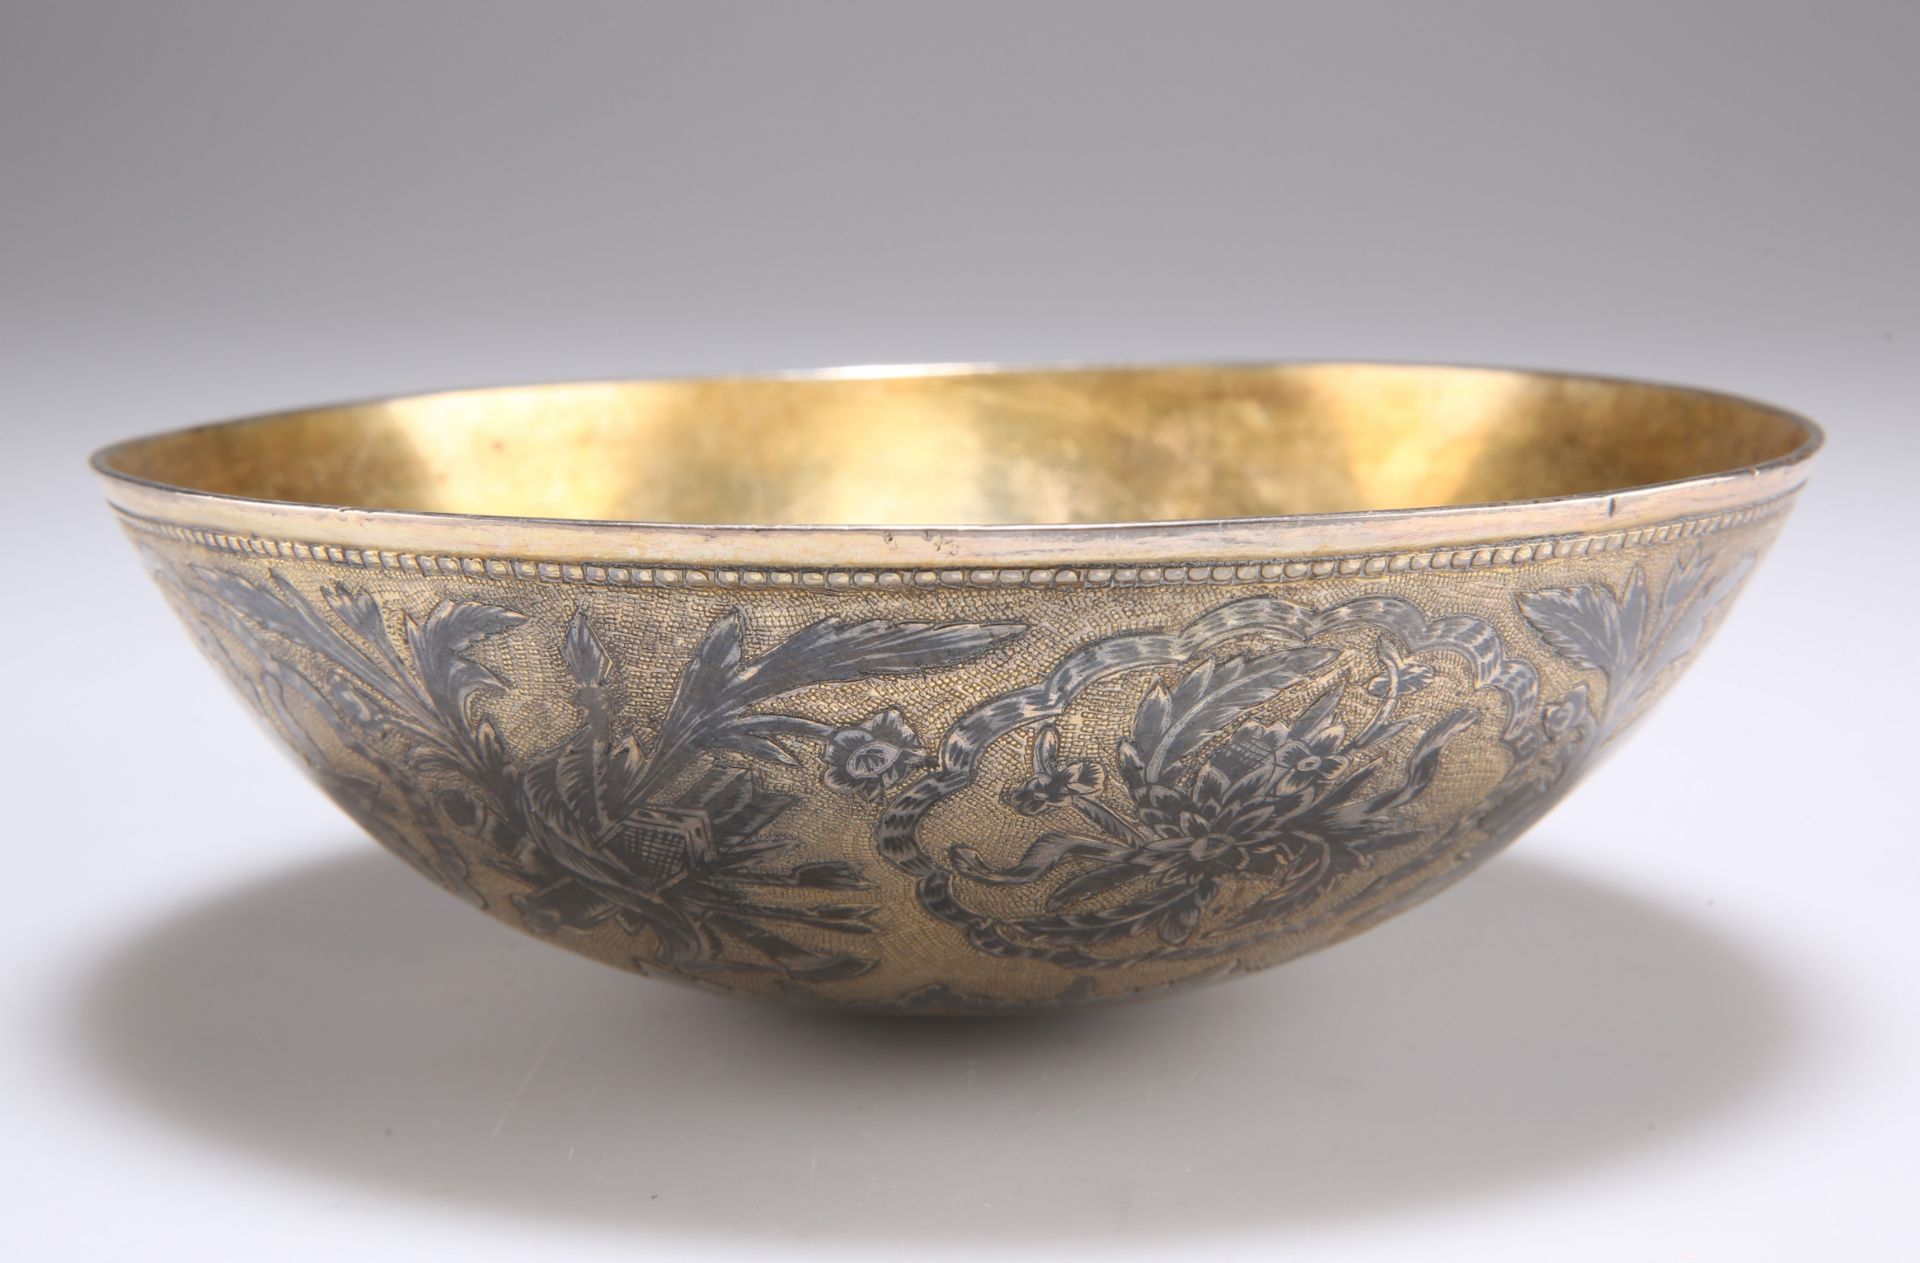 A LATE 18TH CENTURY SILVER-GILT AND NIELLO WORK DRINKING BOWL - Image 2 of 2